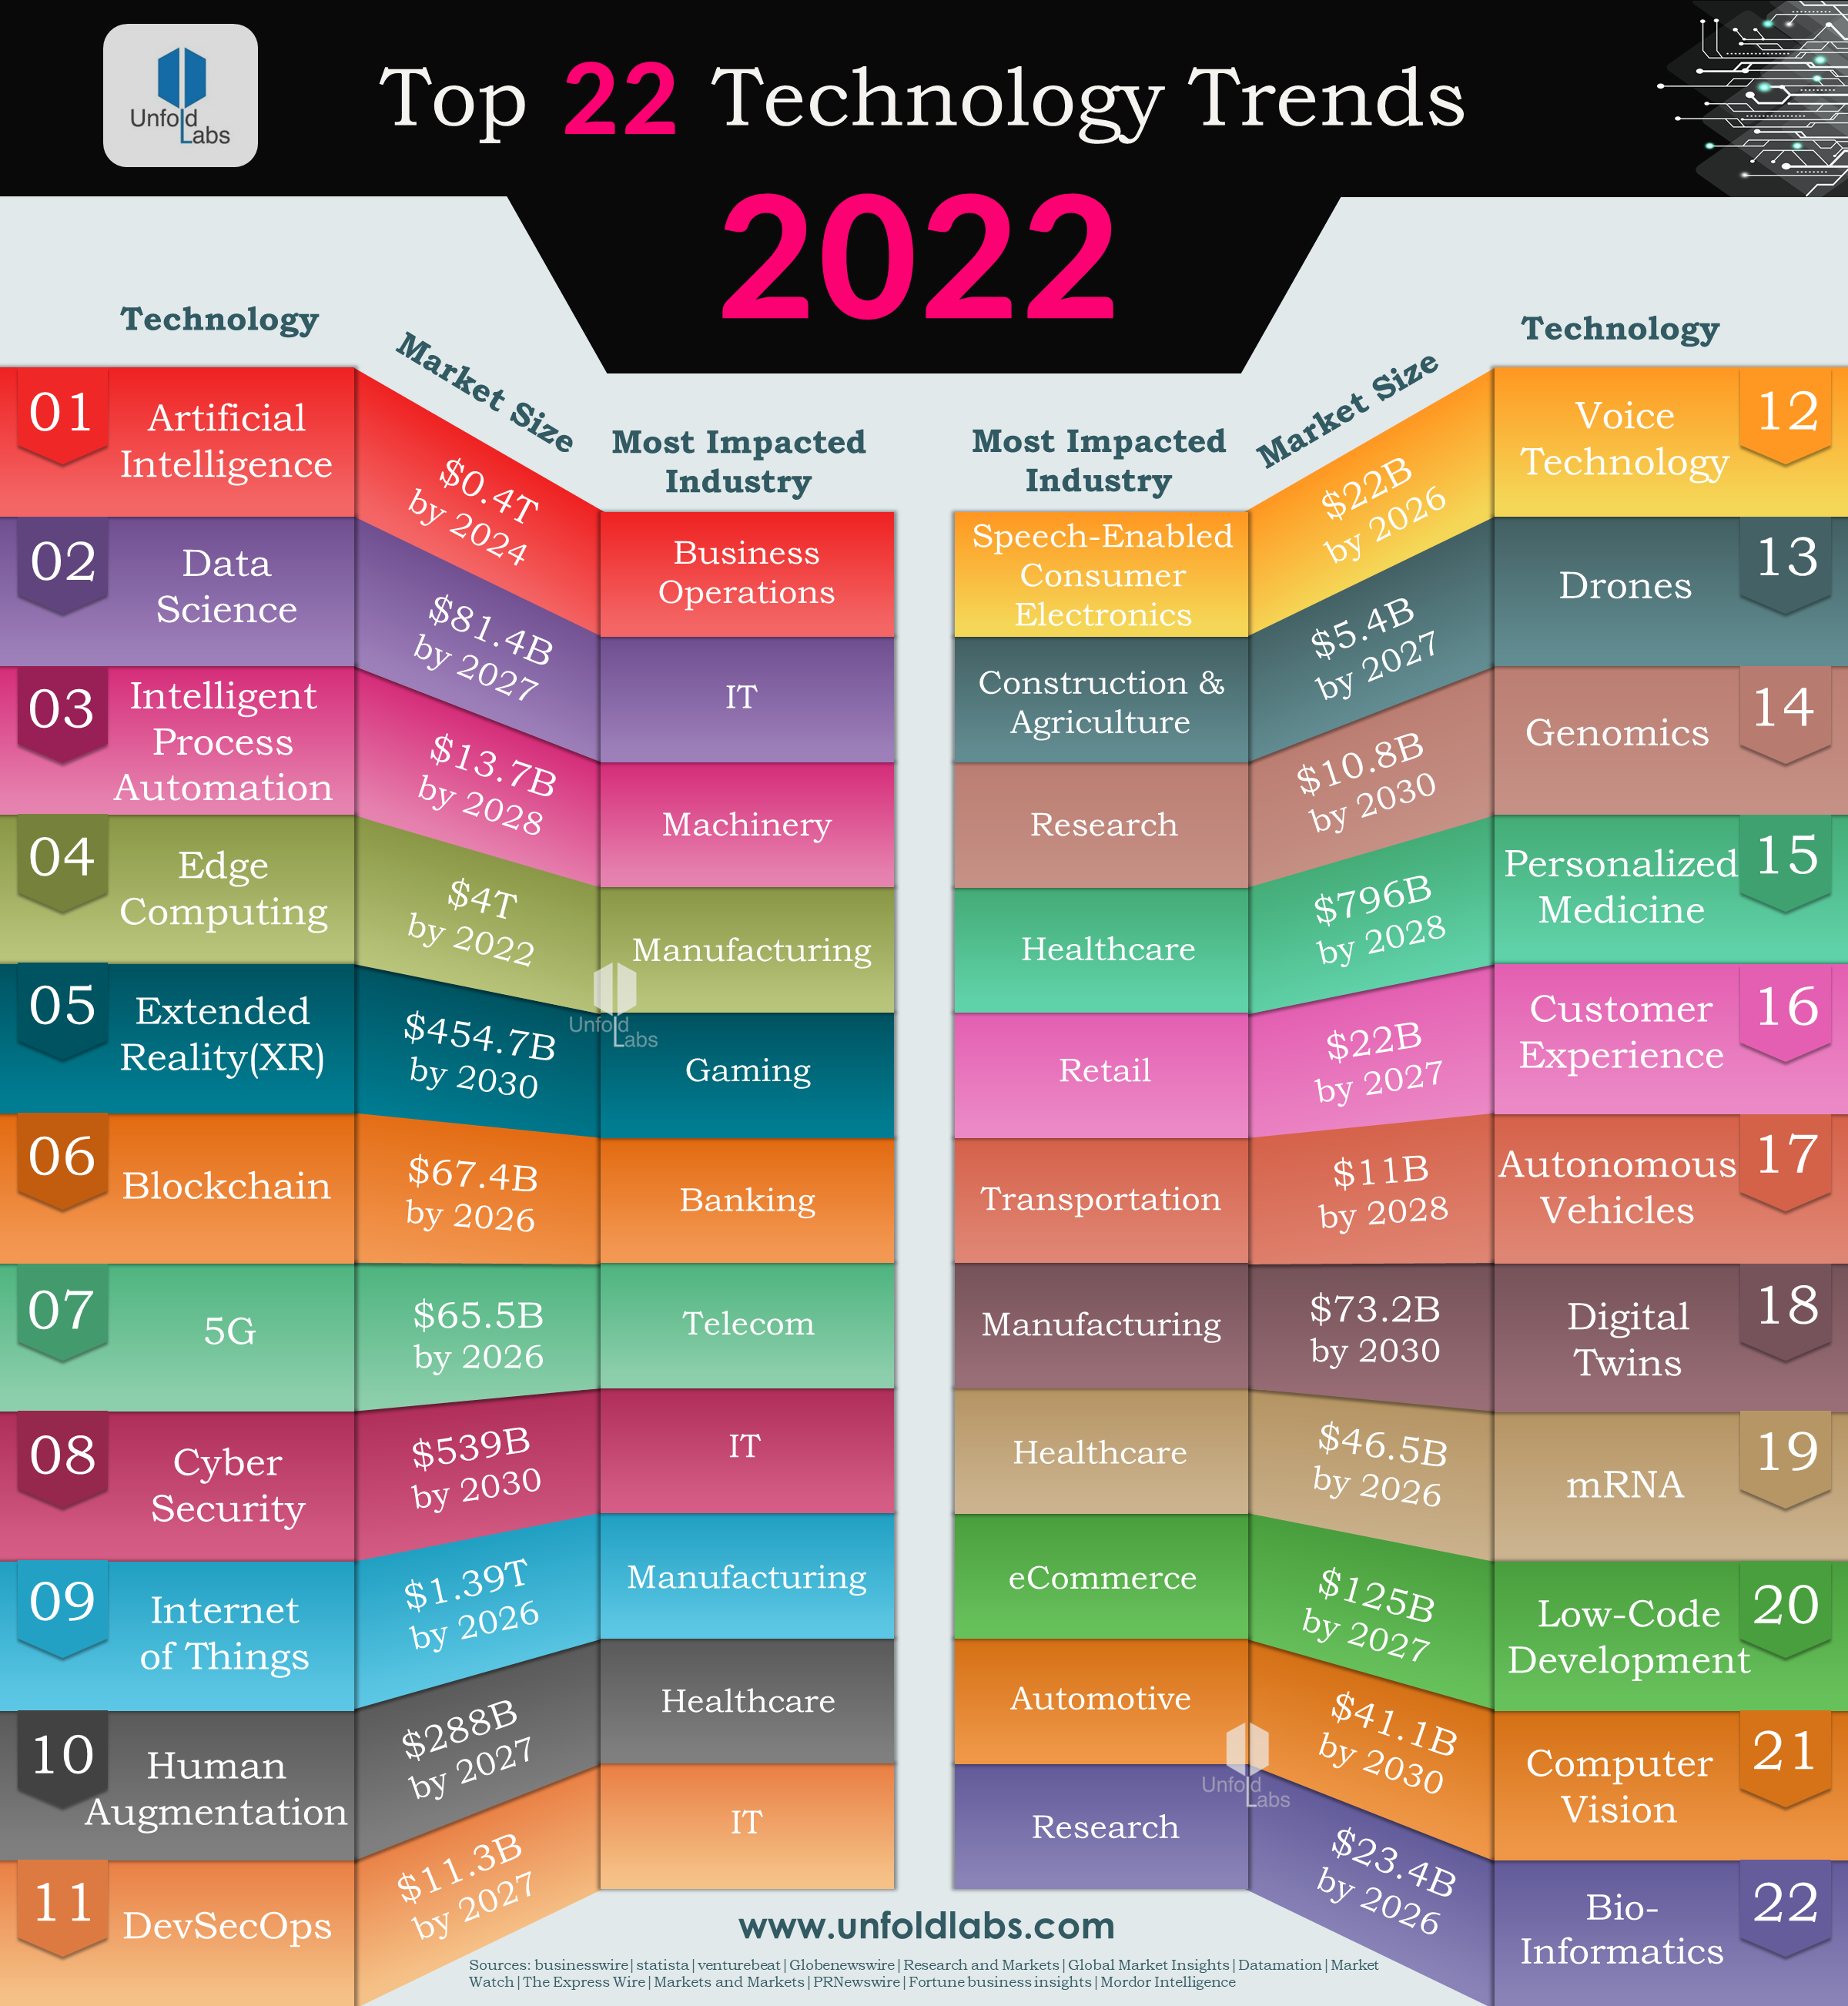 Top 22 Technology Trends 2022